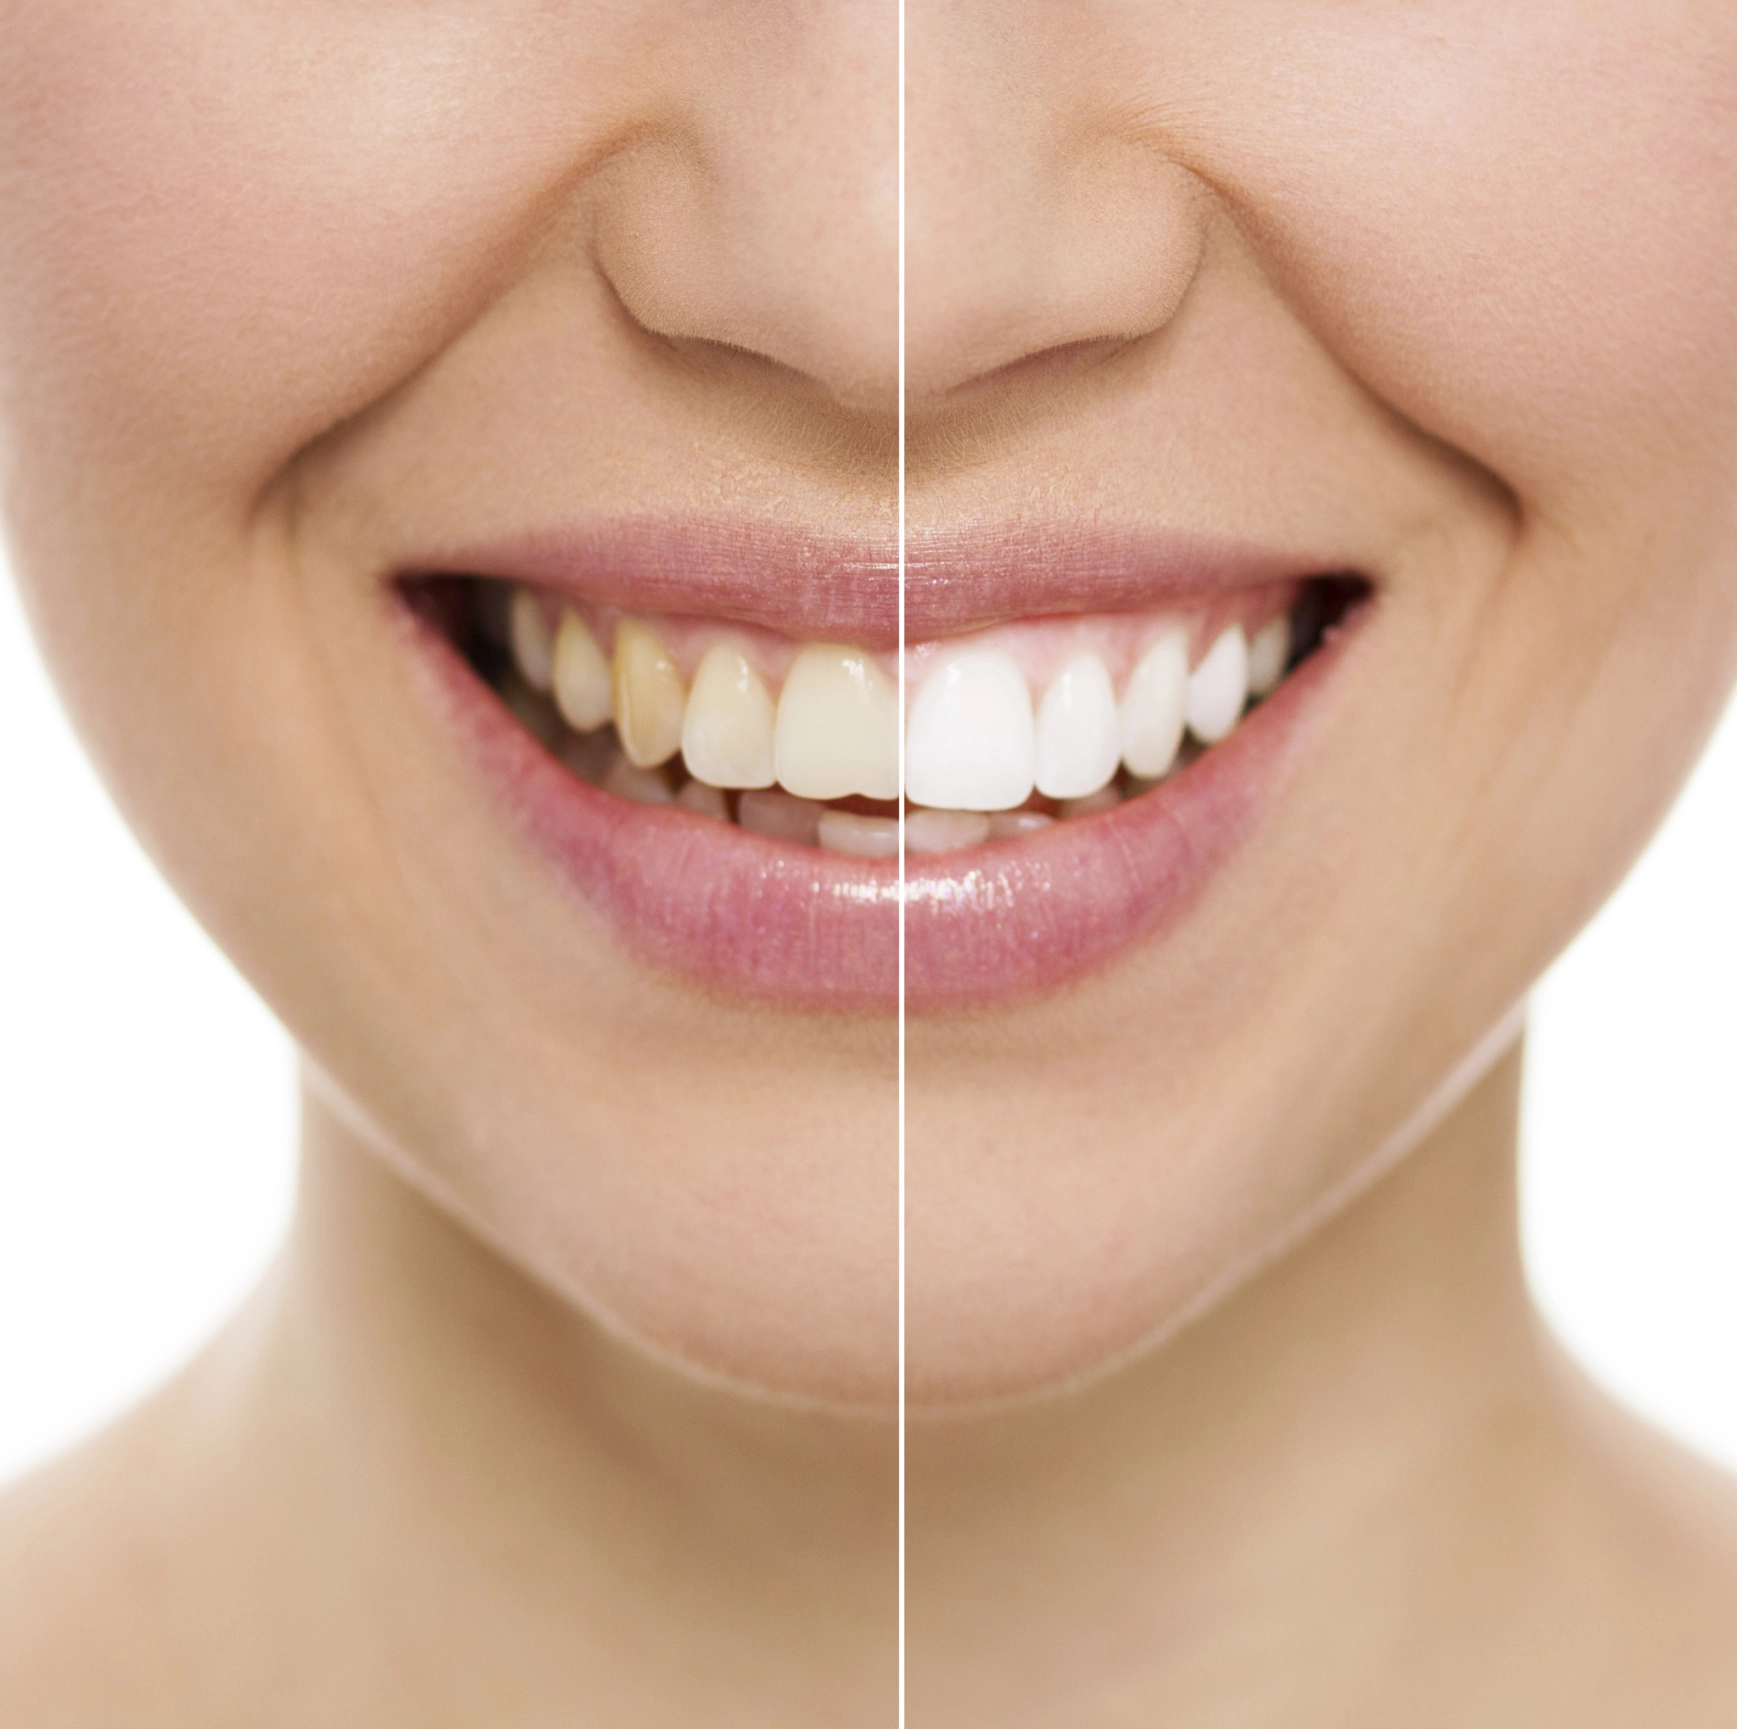 Composite Bonding: A Quick and Easy Solution for Enhancing Your Smile